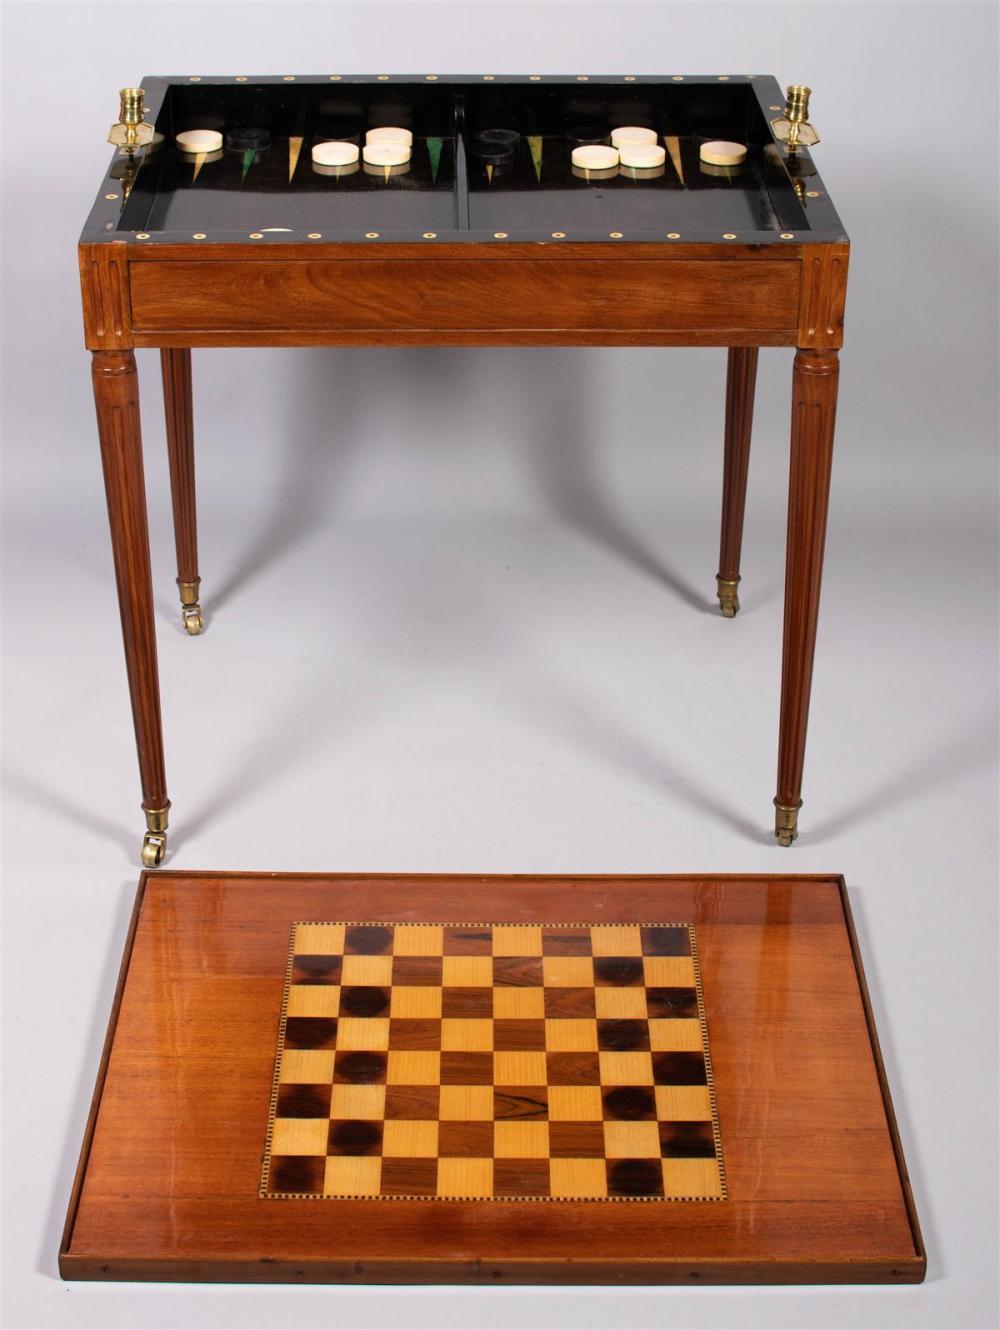 Late 18th century Louis XVI Mahogany and Marquetry Inlaid Tric-Trac games table. Rectangular reversible mold top opens to reveal inlaid game boards in a conforming frieze on turned tapering fluted legs with brass cap feet Measures: 29